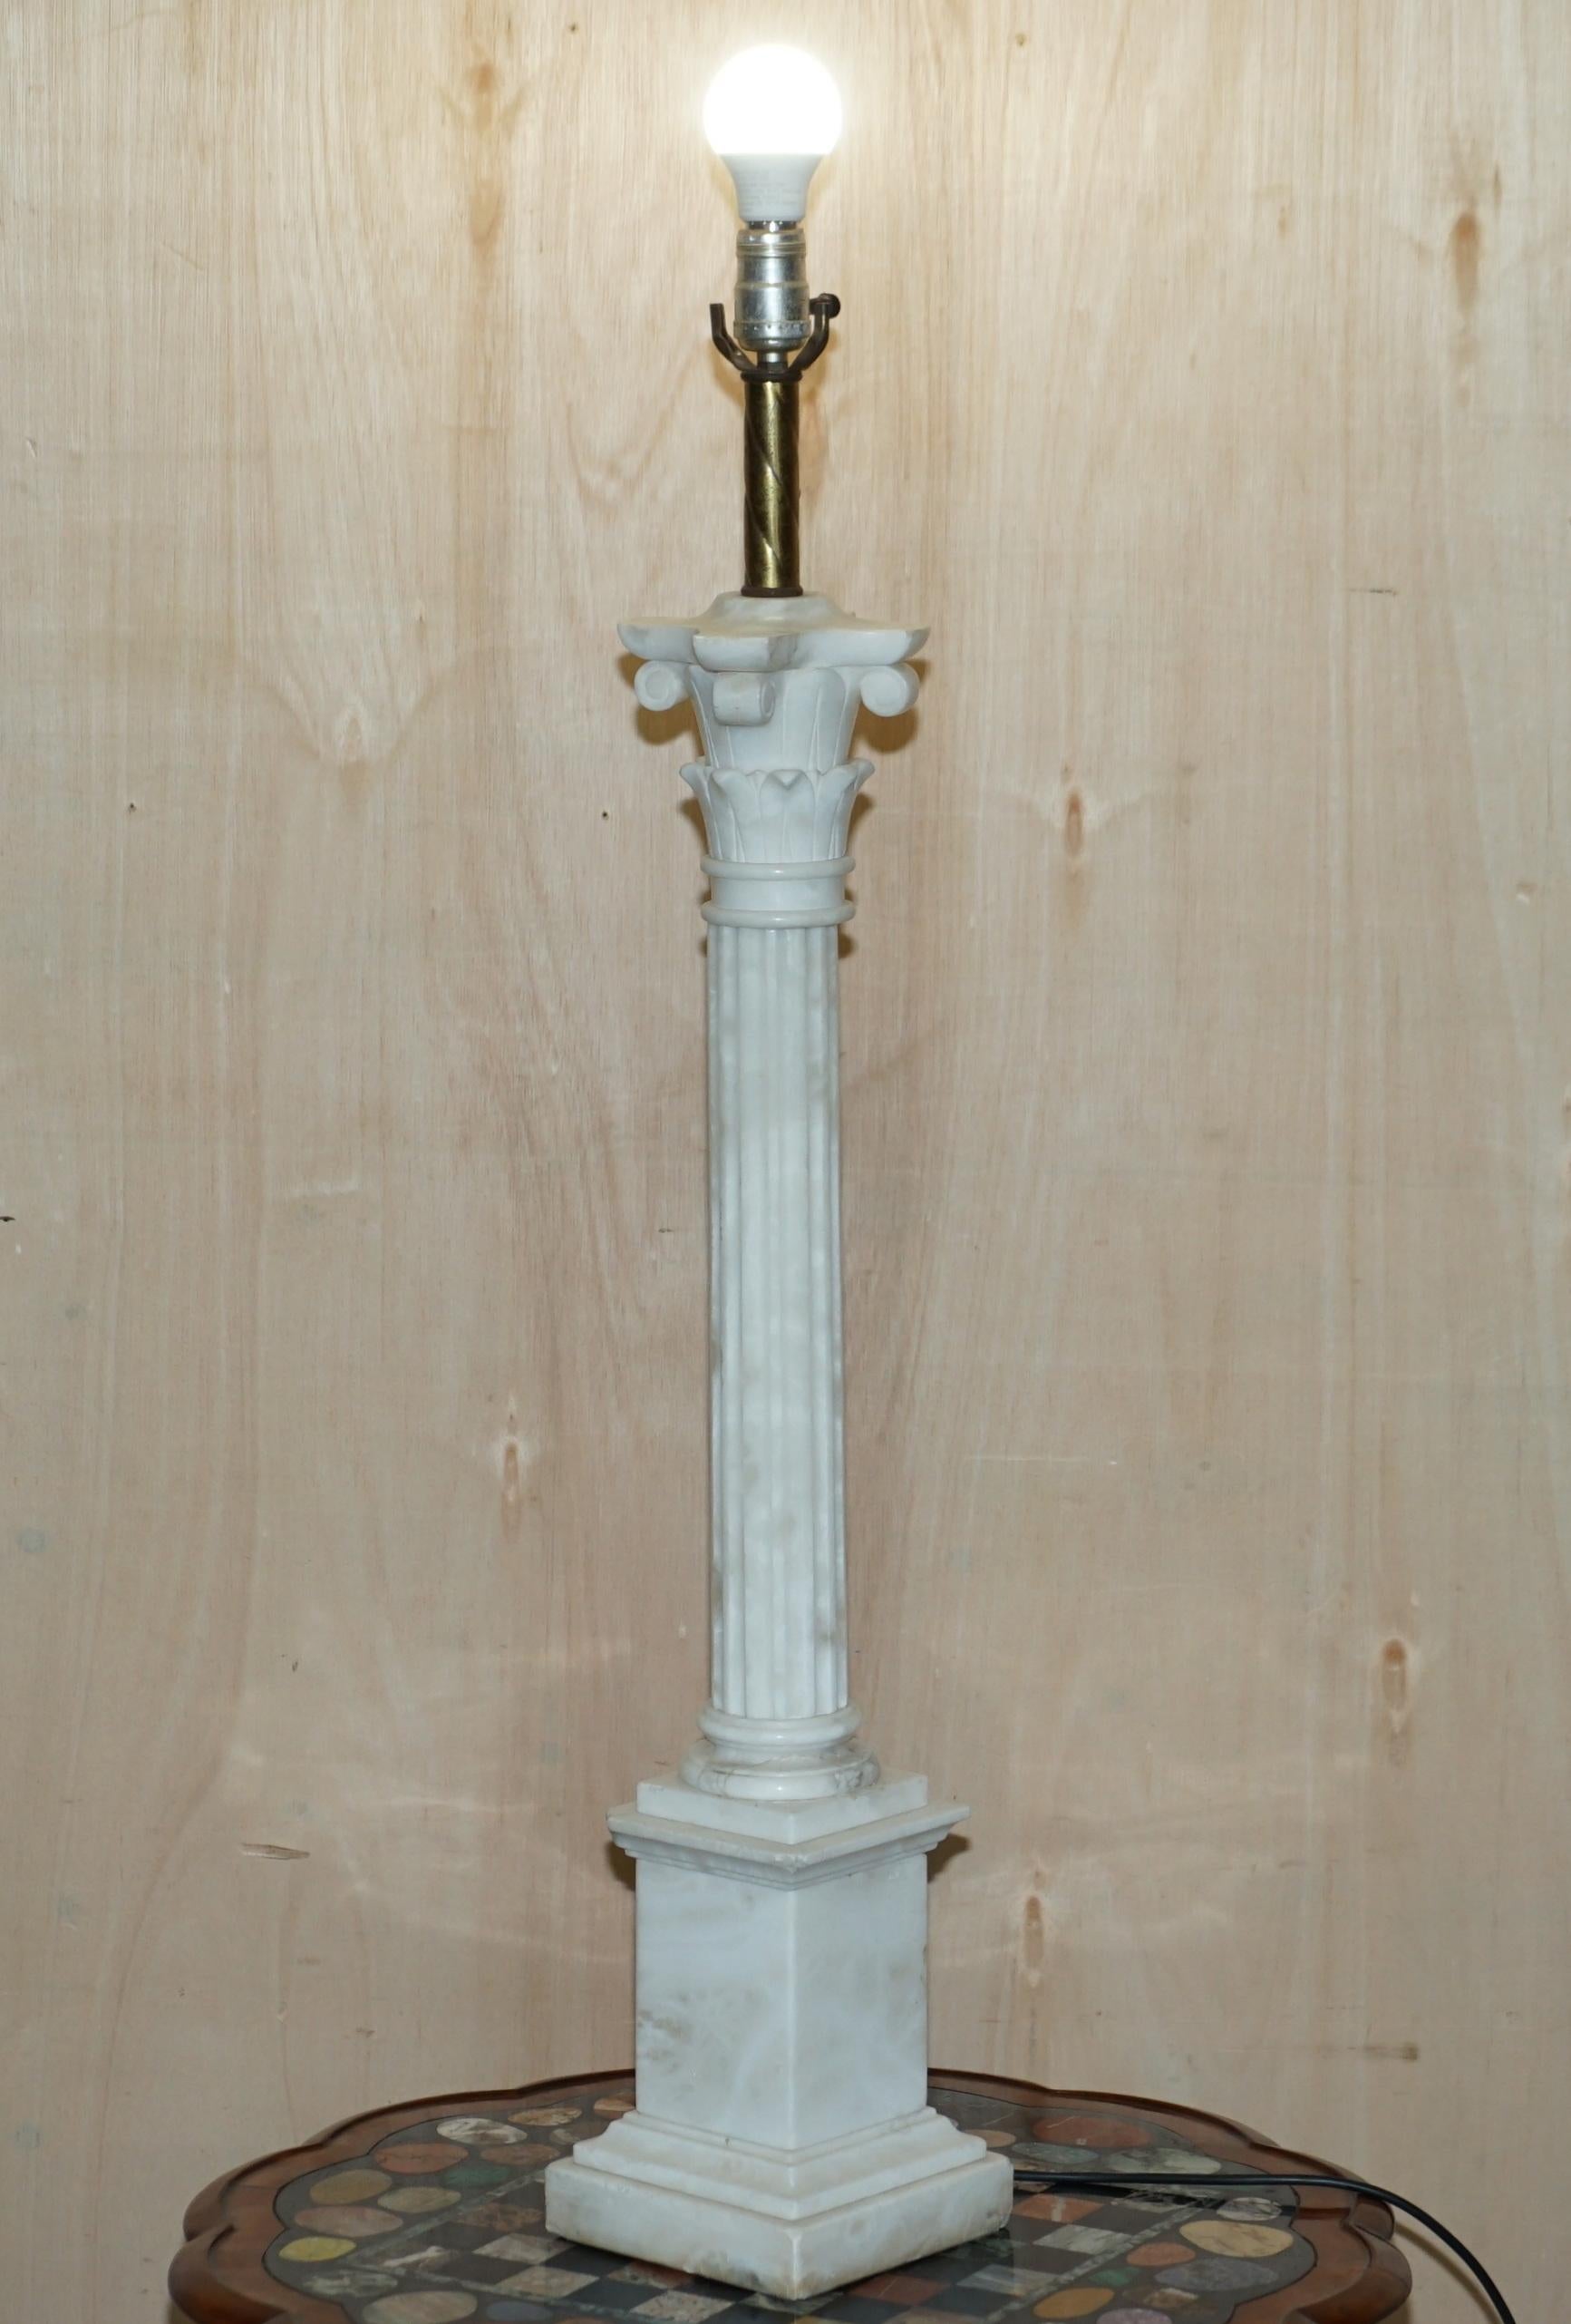 We are delighted to offer for sale this absolutely stunning, very large solid Italian Carrara Marble table lamp

This lamp is very collectable, it is exceptionally large for its type, nearly 1 meter tall

We have cleaned the lamp, it has various